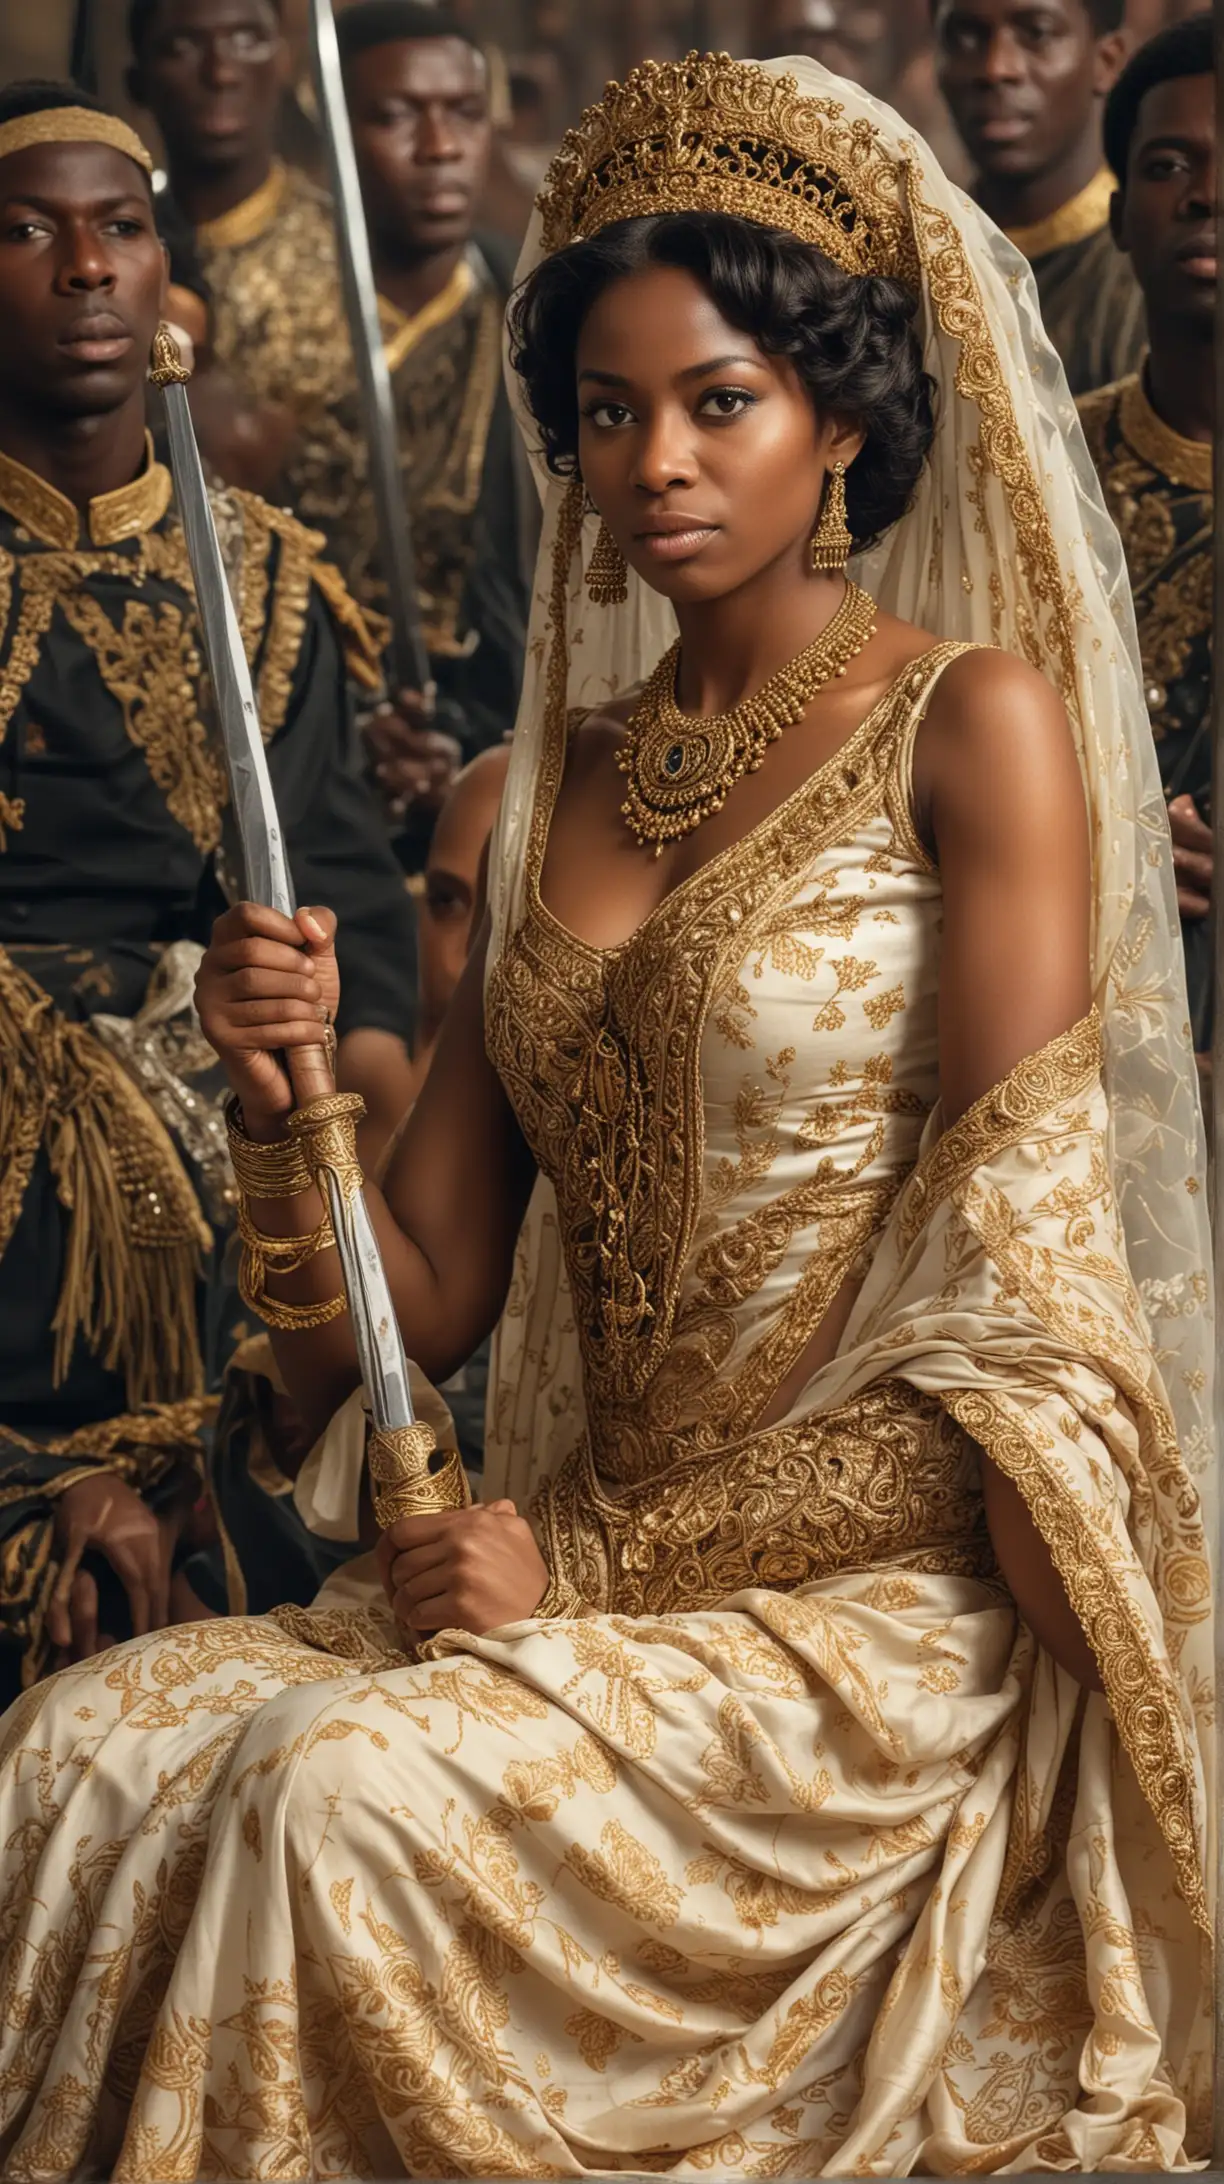 In the 1600s, the female ruler of Angola is called Zingadi. She is seated and wearing an attractive light sari dress, holding a sword in both hands. Behind her is an army of black men. Close up the picture.
